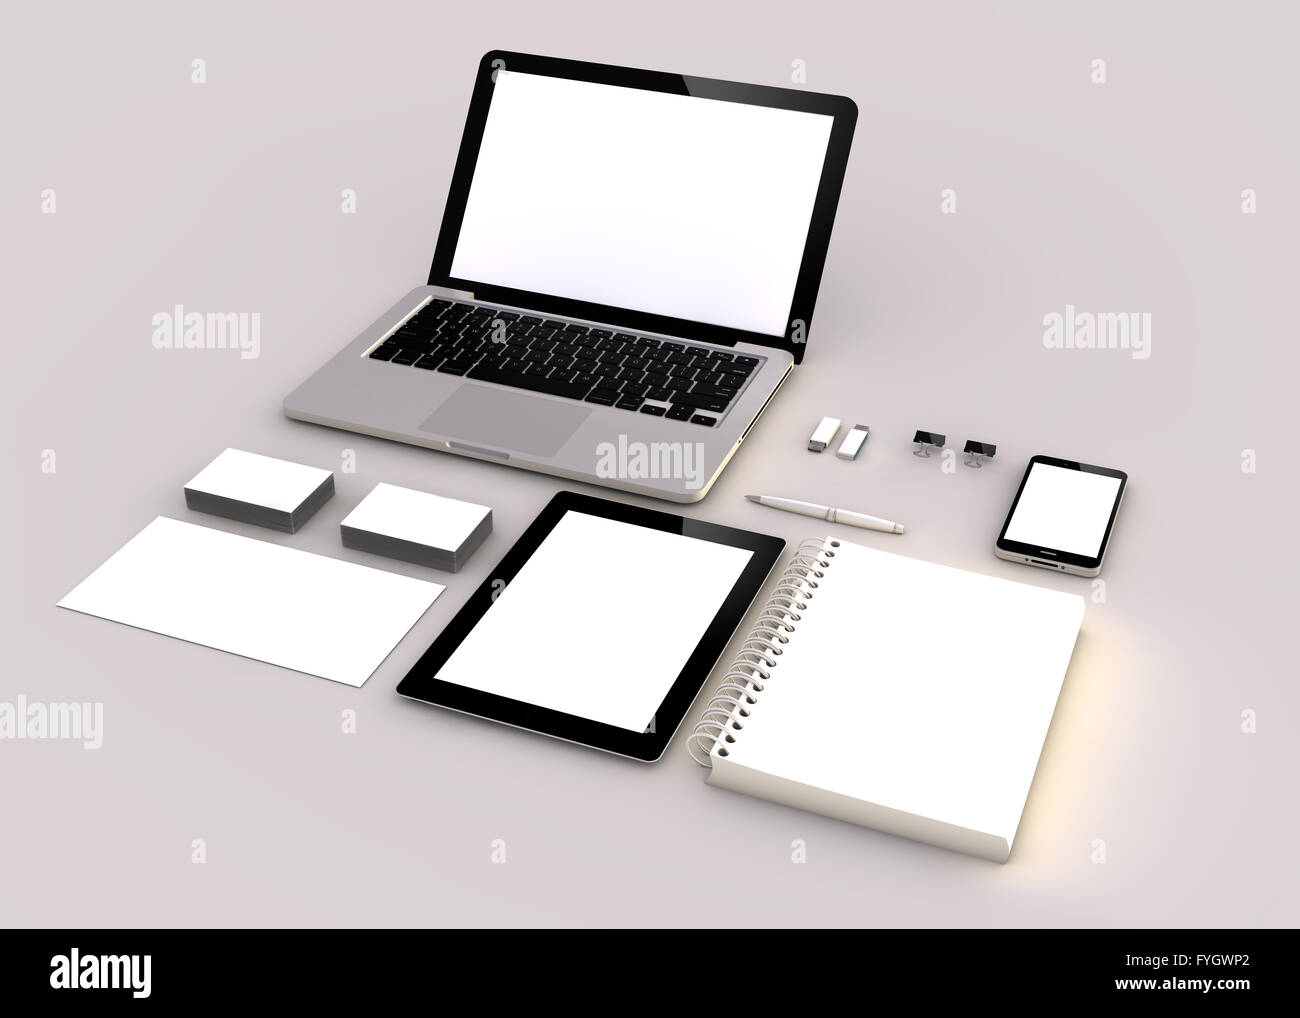 business concept: 3g generated mock up for corporate identity presentations Stock Photo